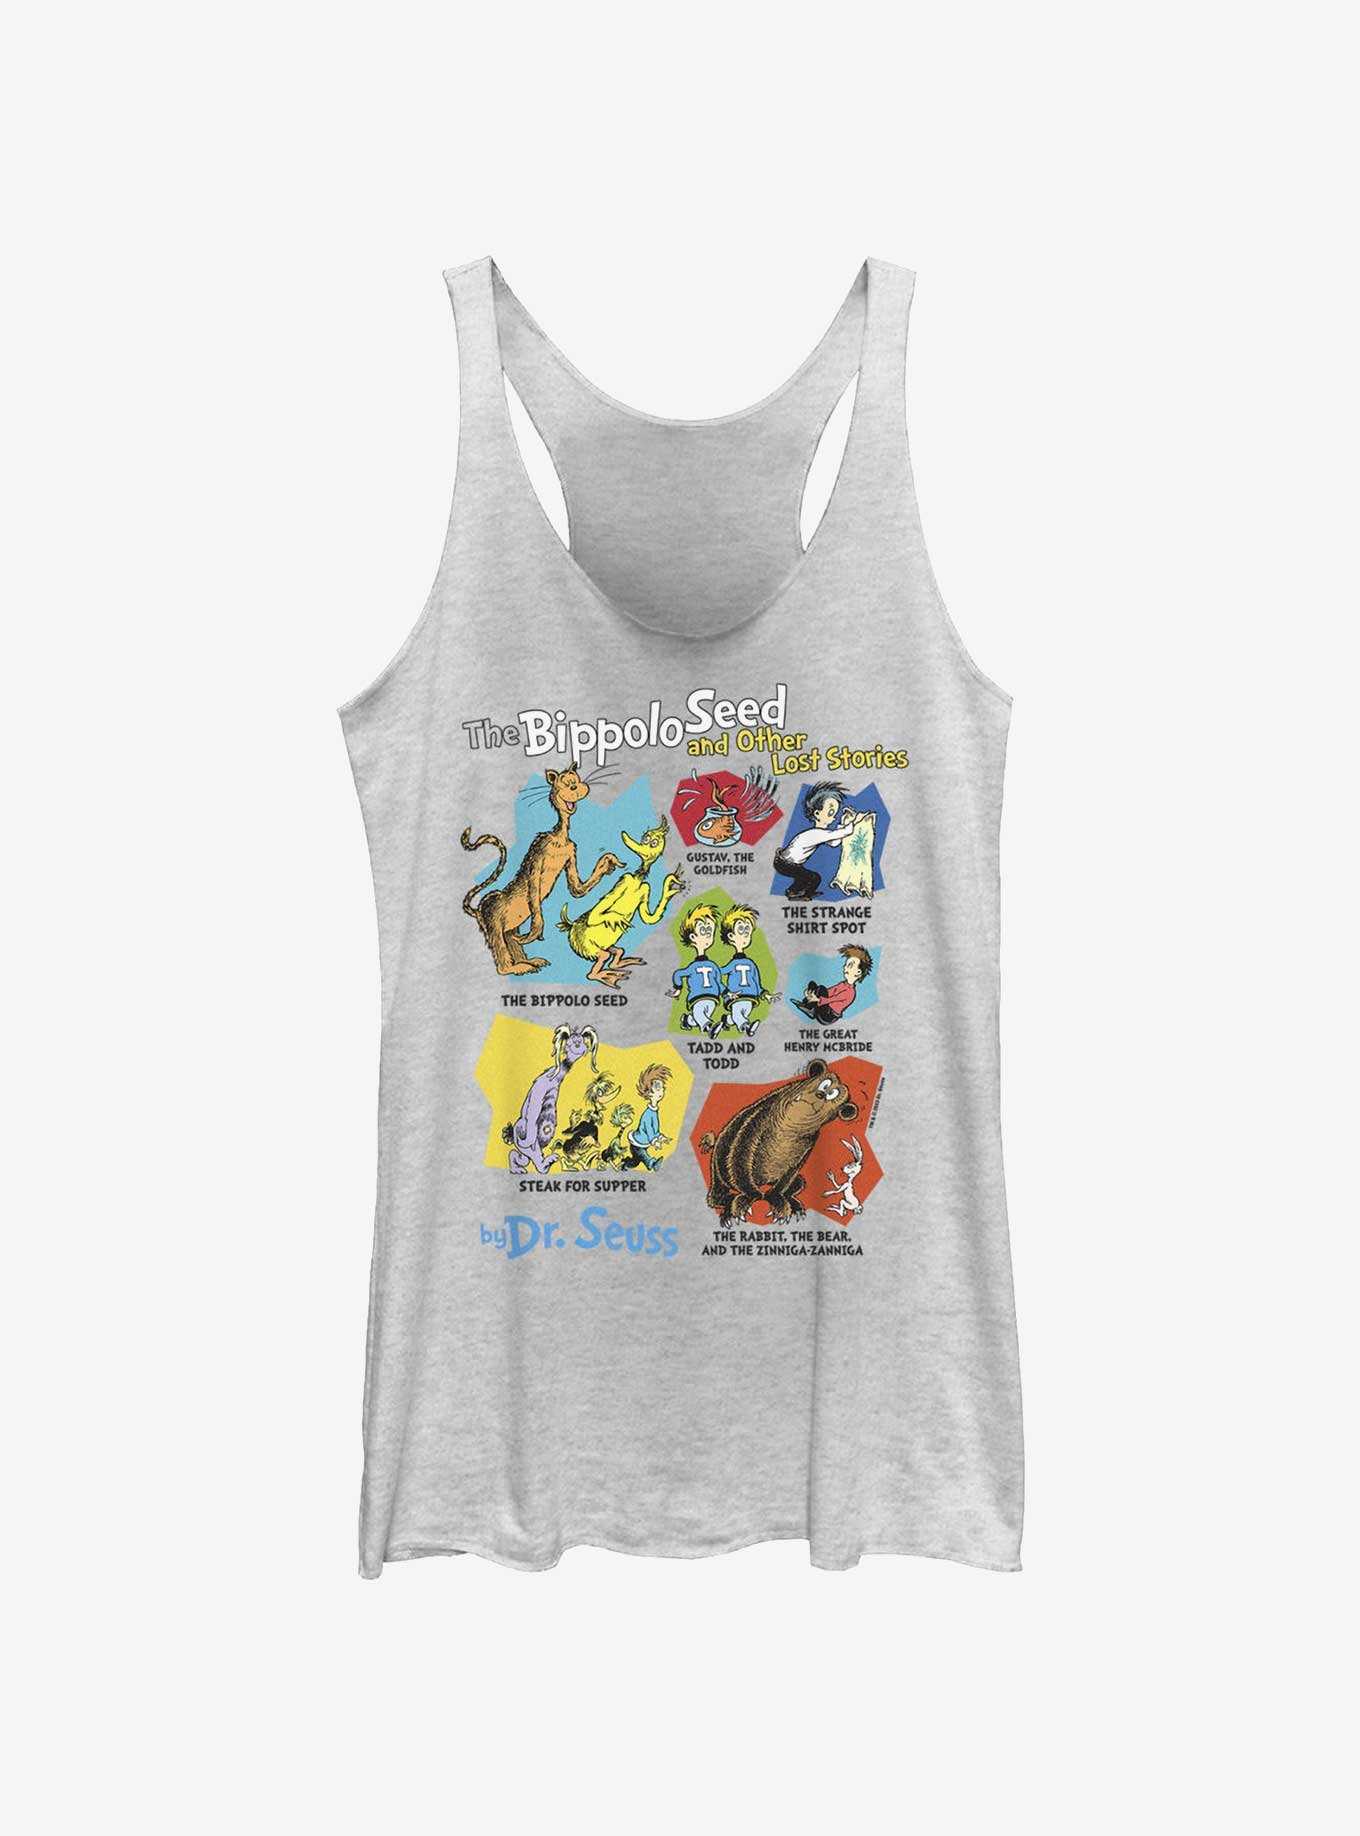 Dr. Seuss's The Bippolo Seed & Other Lost Stories Adventures Womens Tank Top, , hi-res